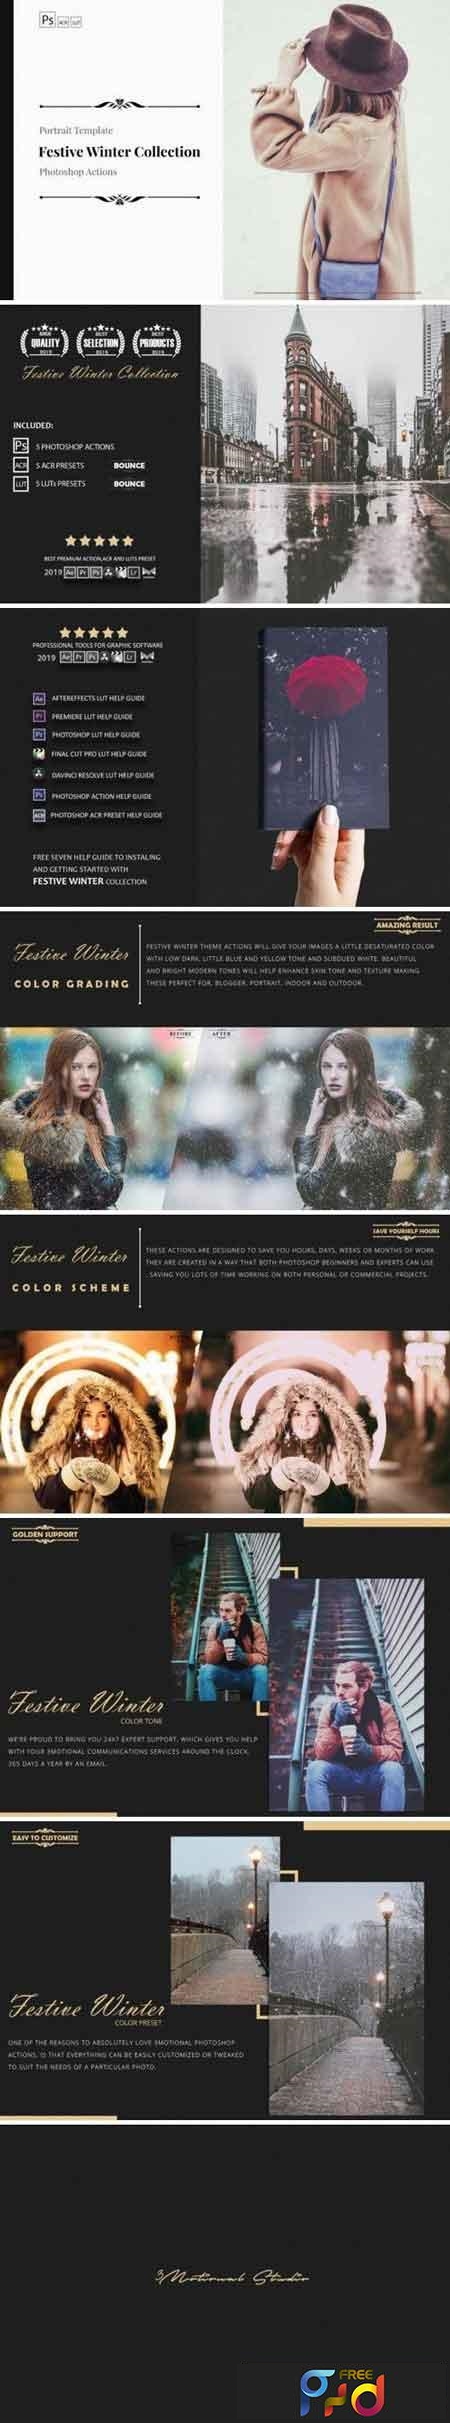 Neo Festive Winter Story Color Grading photoshop actions